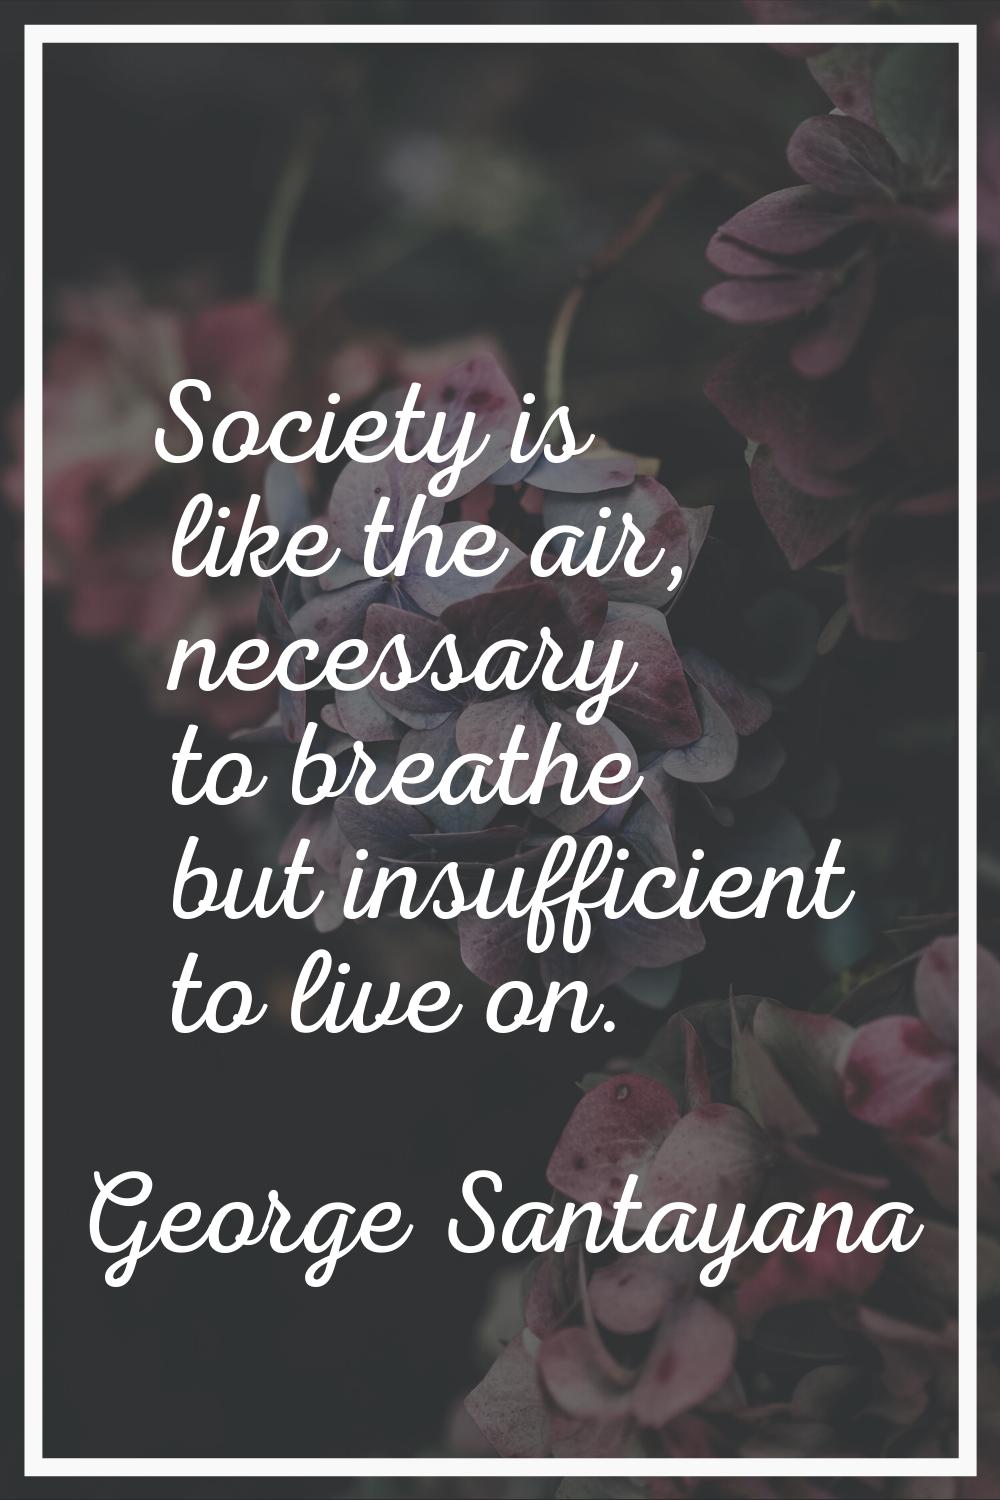 Society is like the air, necessary to breathe but insufficient to live on.